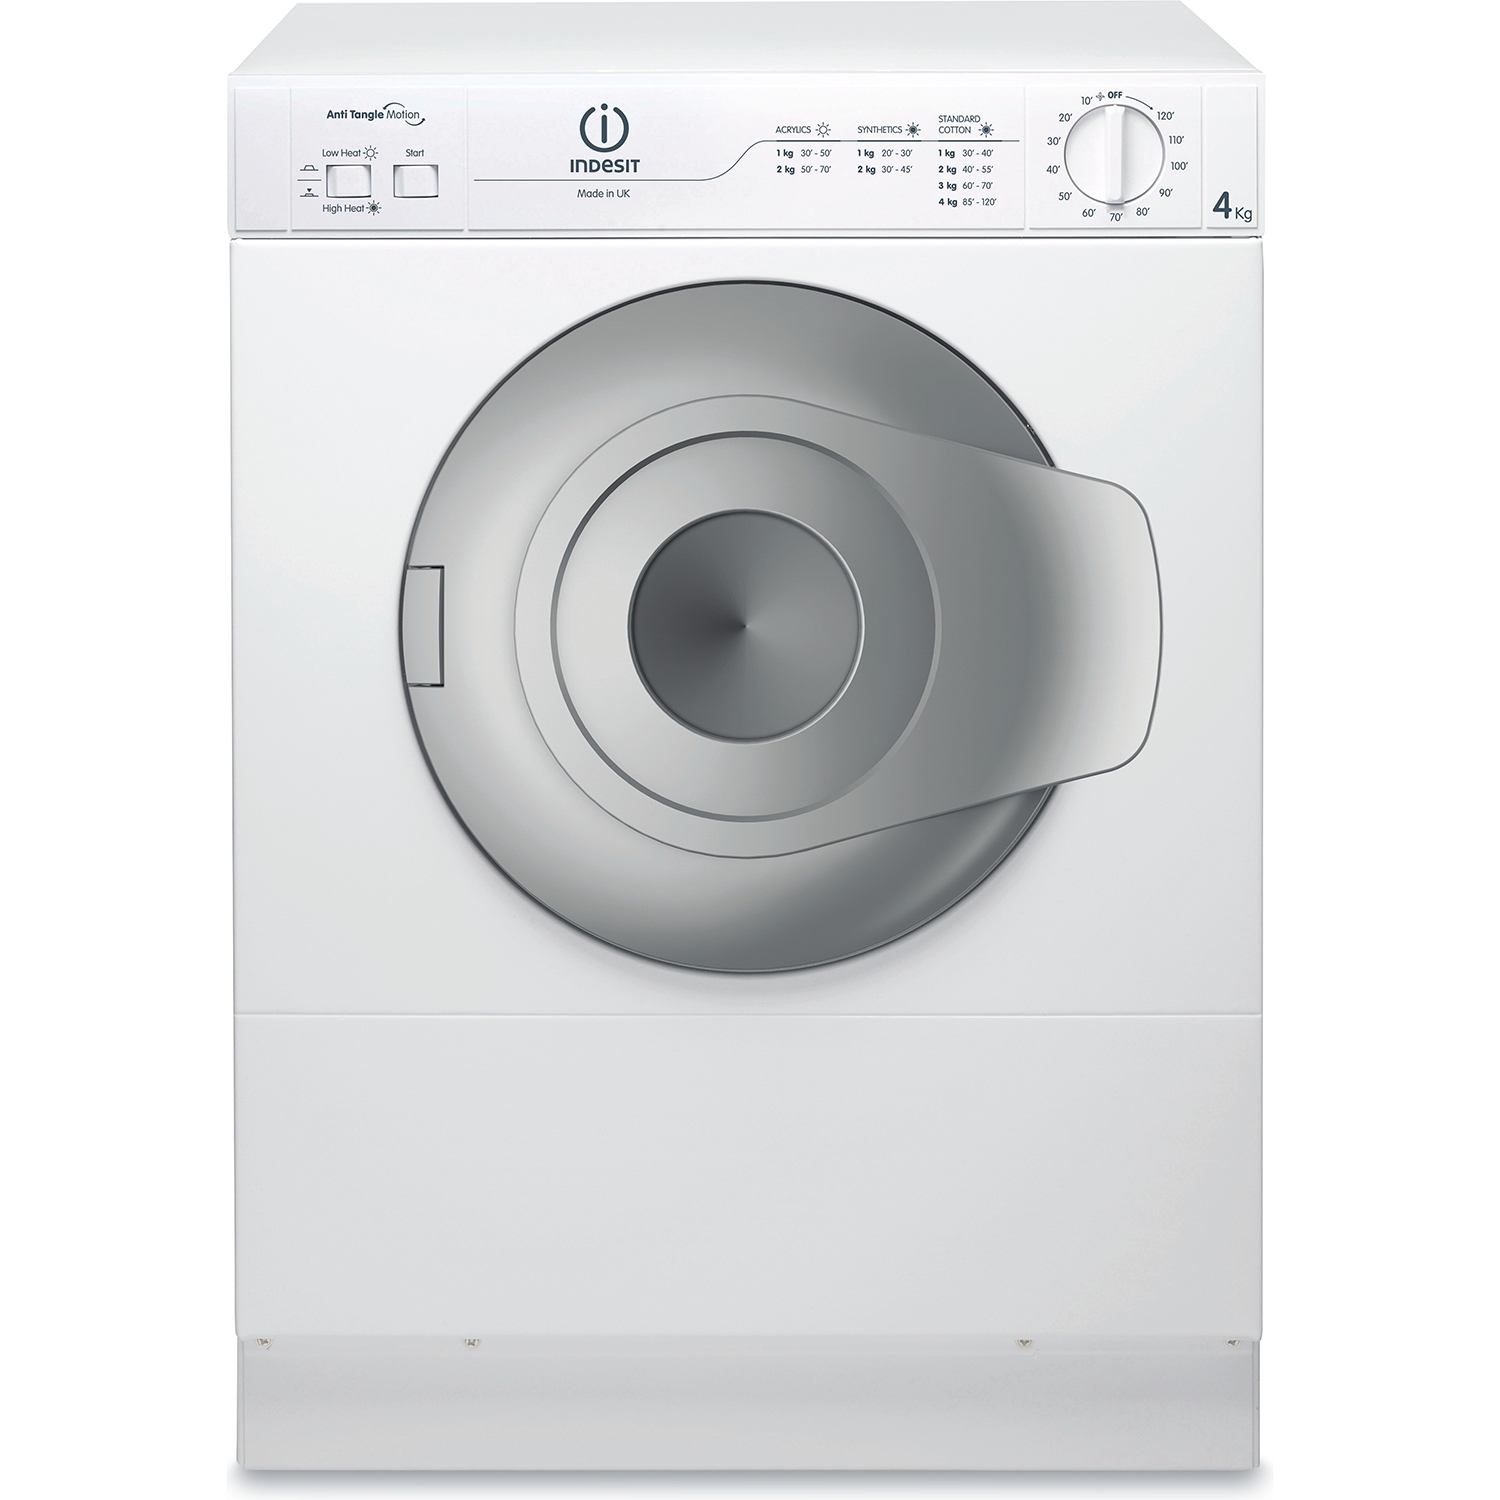 Indesit NIS41V 4kg Vented Tumble Dryer - White with Graphite Door  - 0